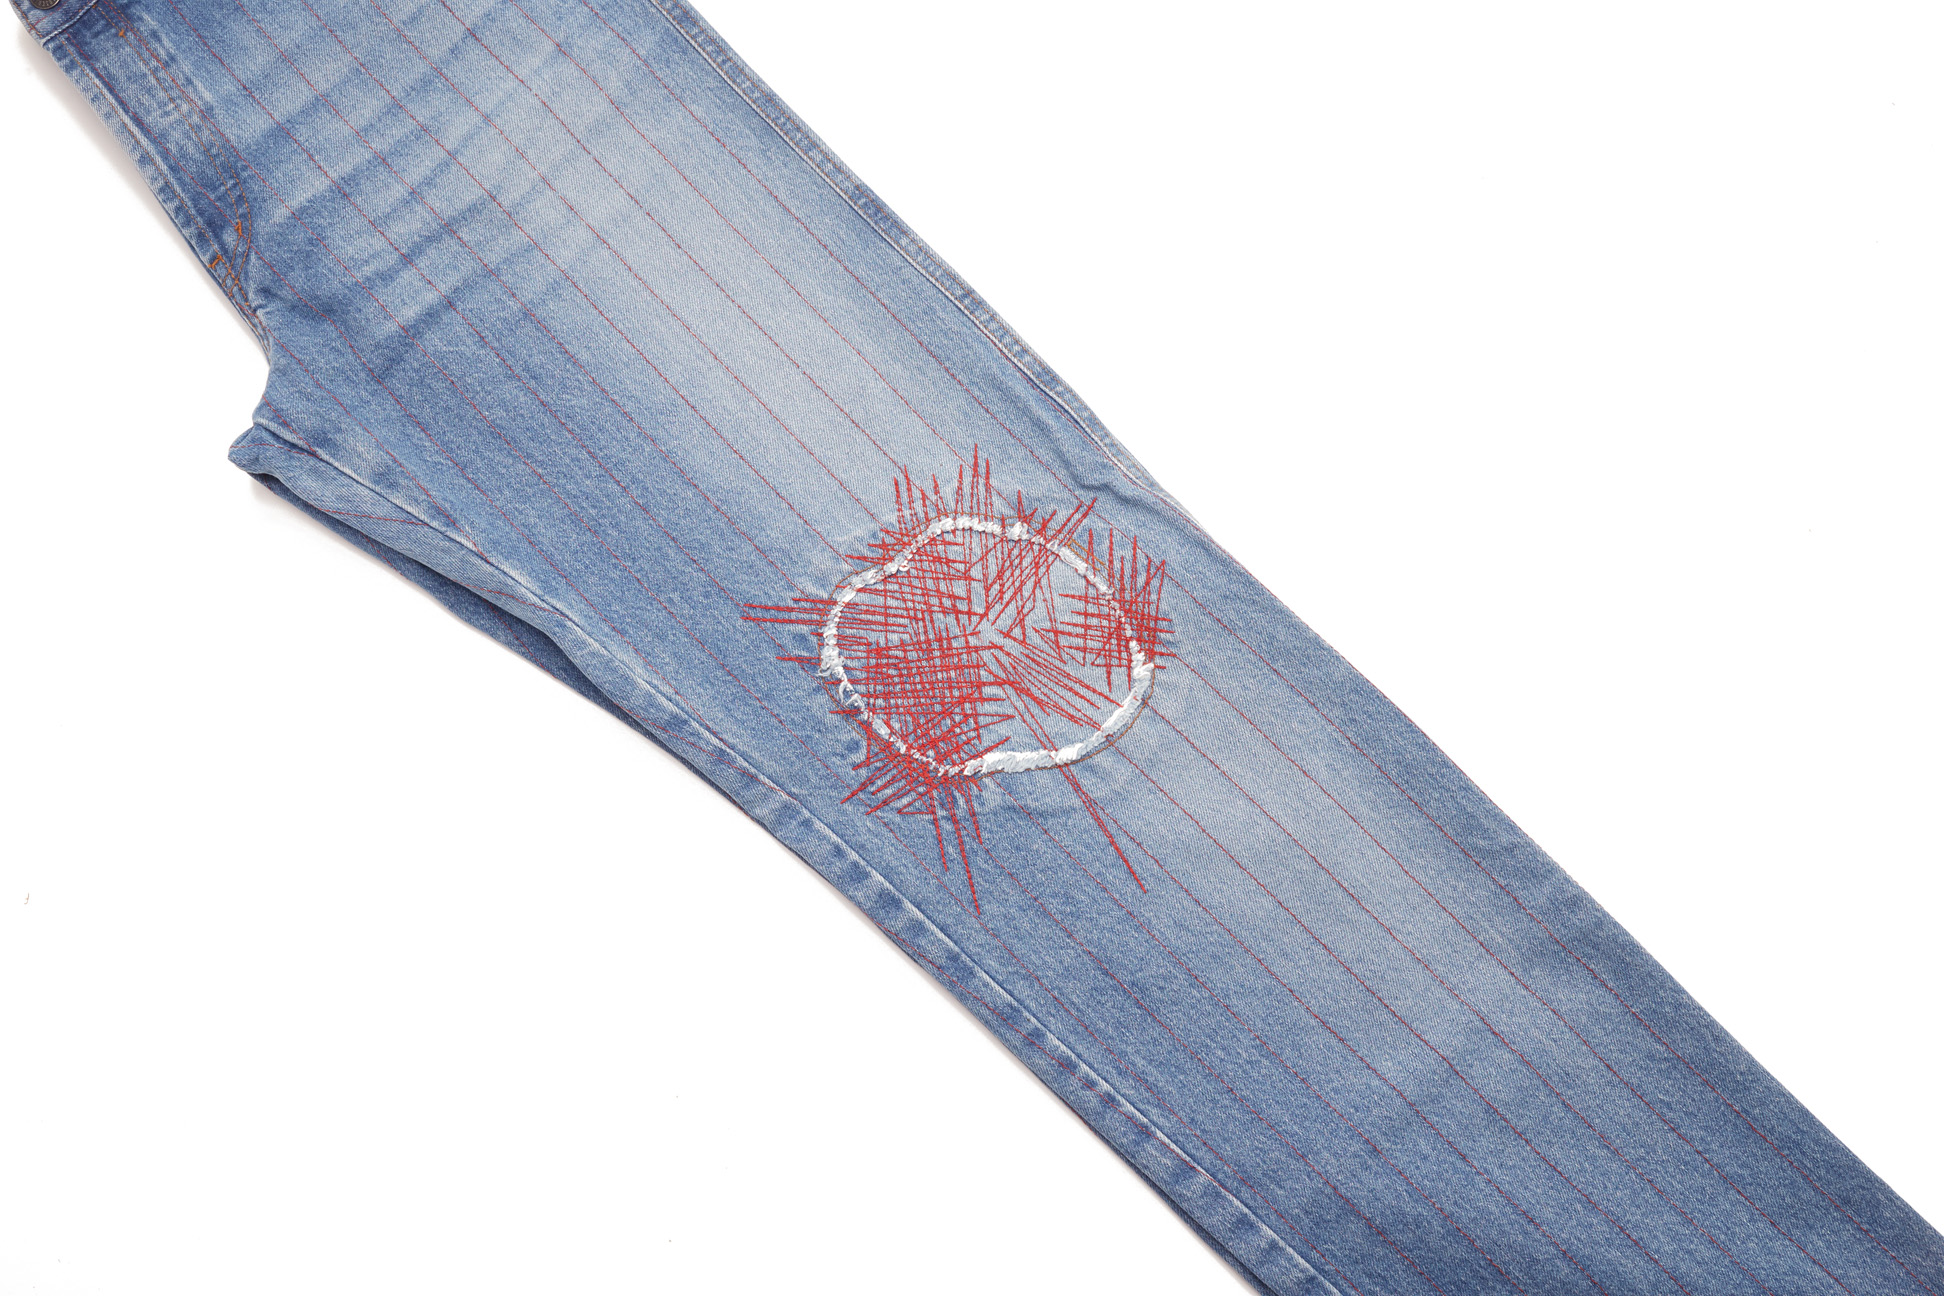 A PAIR OF MOSCHINO DENIM PINSTRIPE JEANS - Image 2 of 3